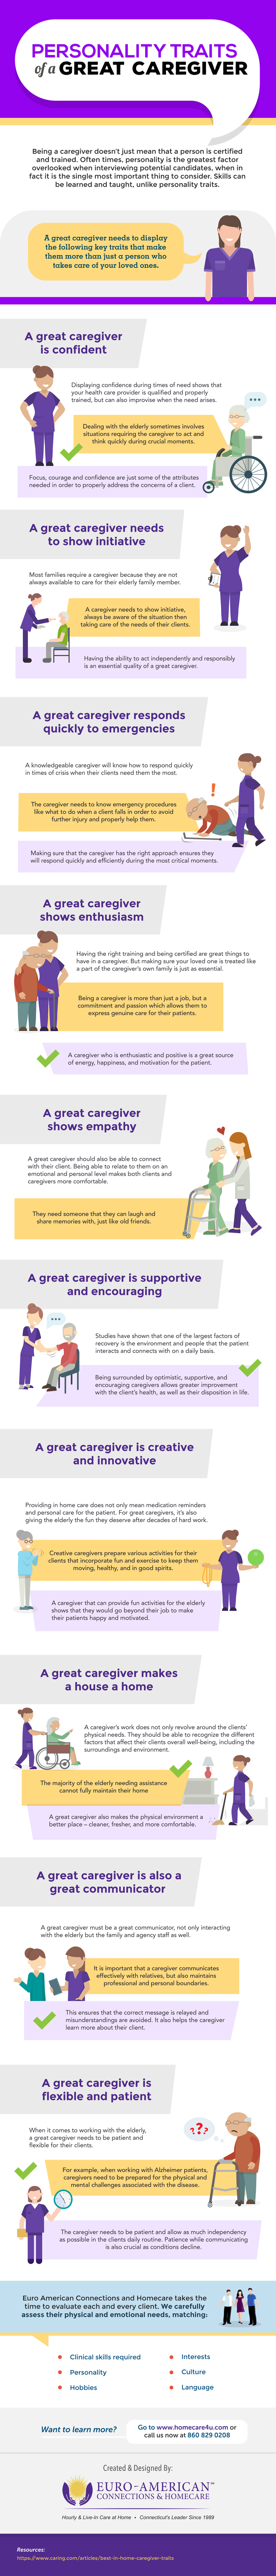 infographic listing the personality traits of a good caregiver